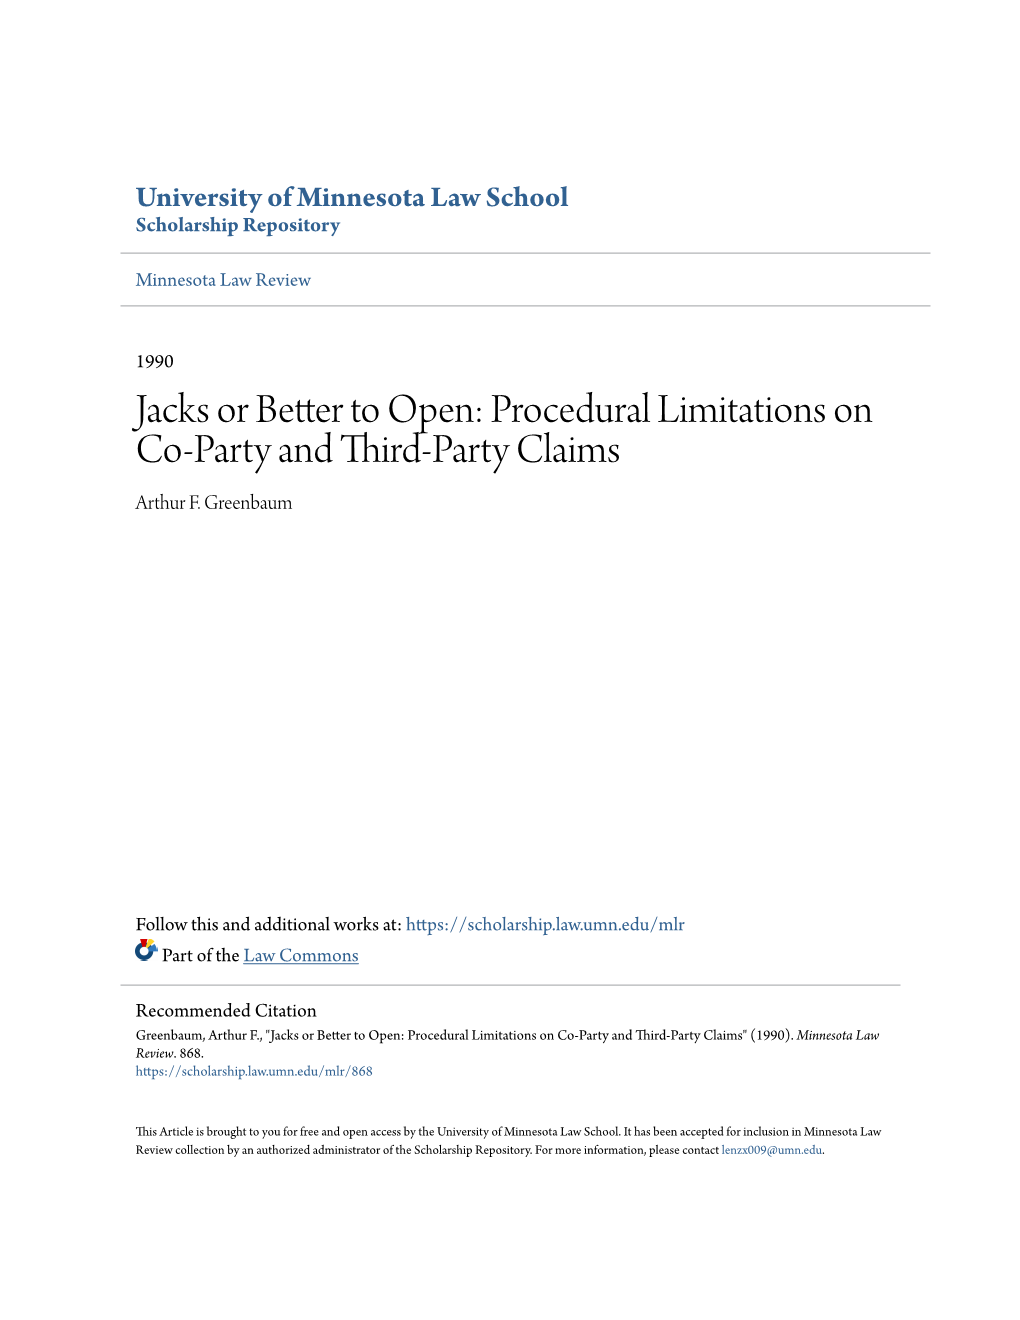 Procedural Limitations on Co-Party and Third-Party Claims Arthur F